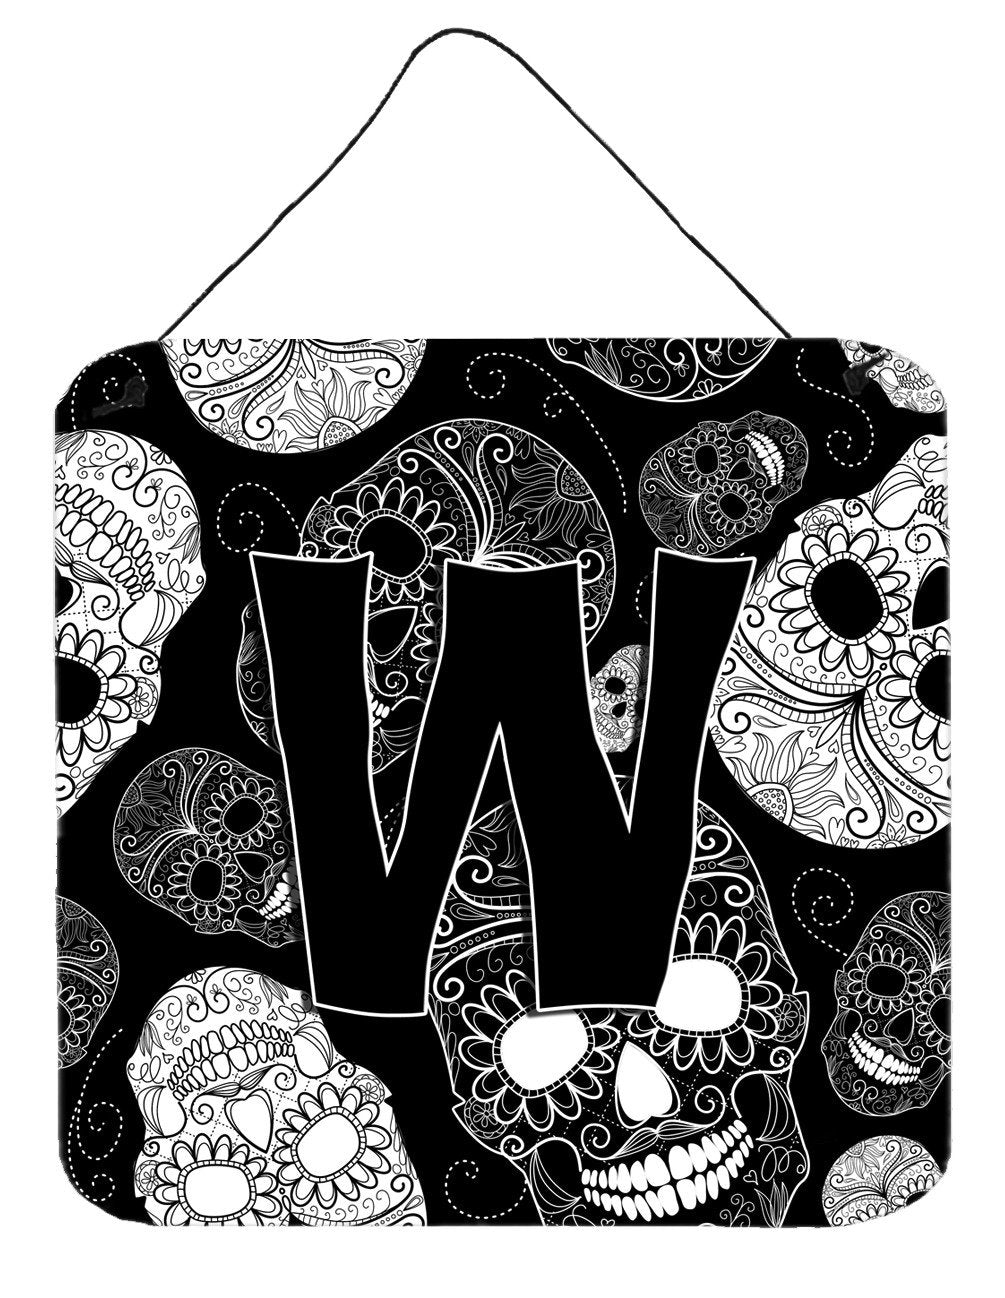 Letter W Day of the Dead Skulls Black Wall or Door Hanging Prints CJ2008-WDS66 by Caroline's Treasures